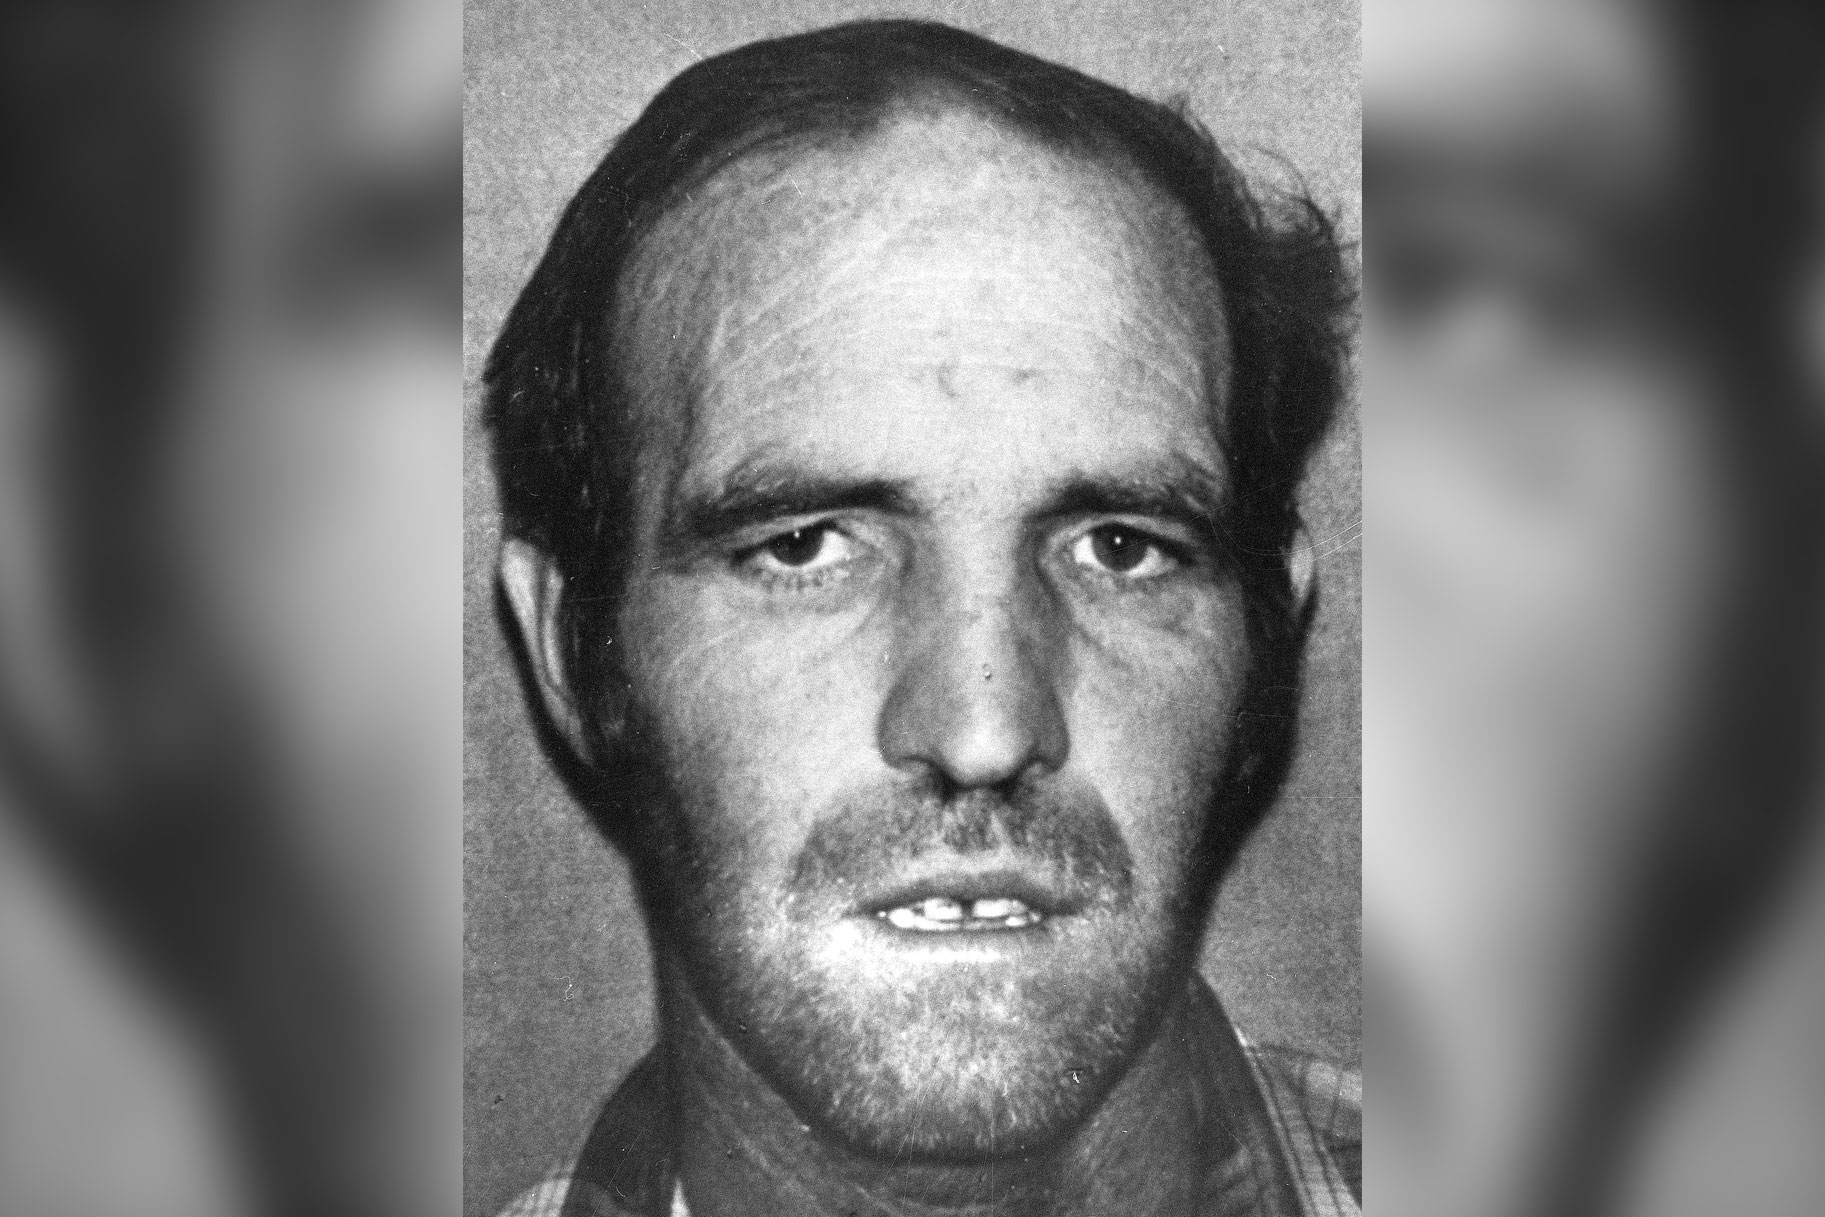 Who Were Henry Lee Lucas and Ottis Toole? 